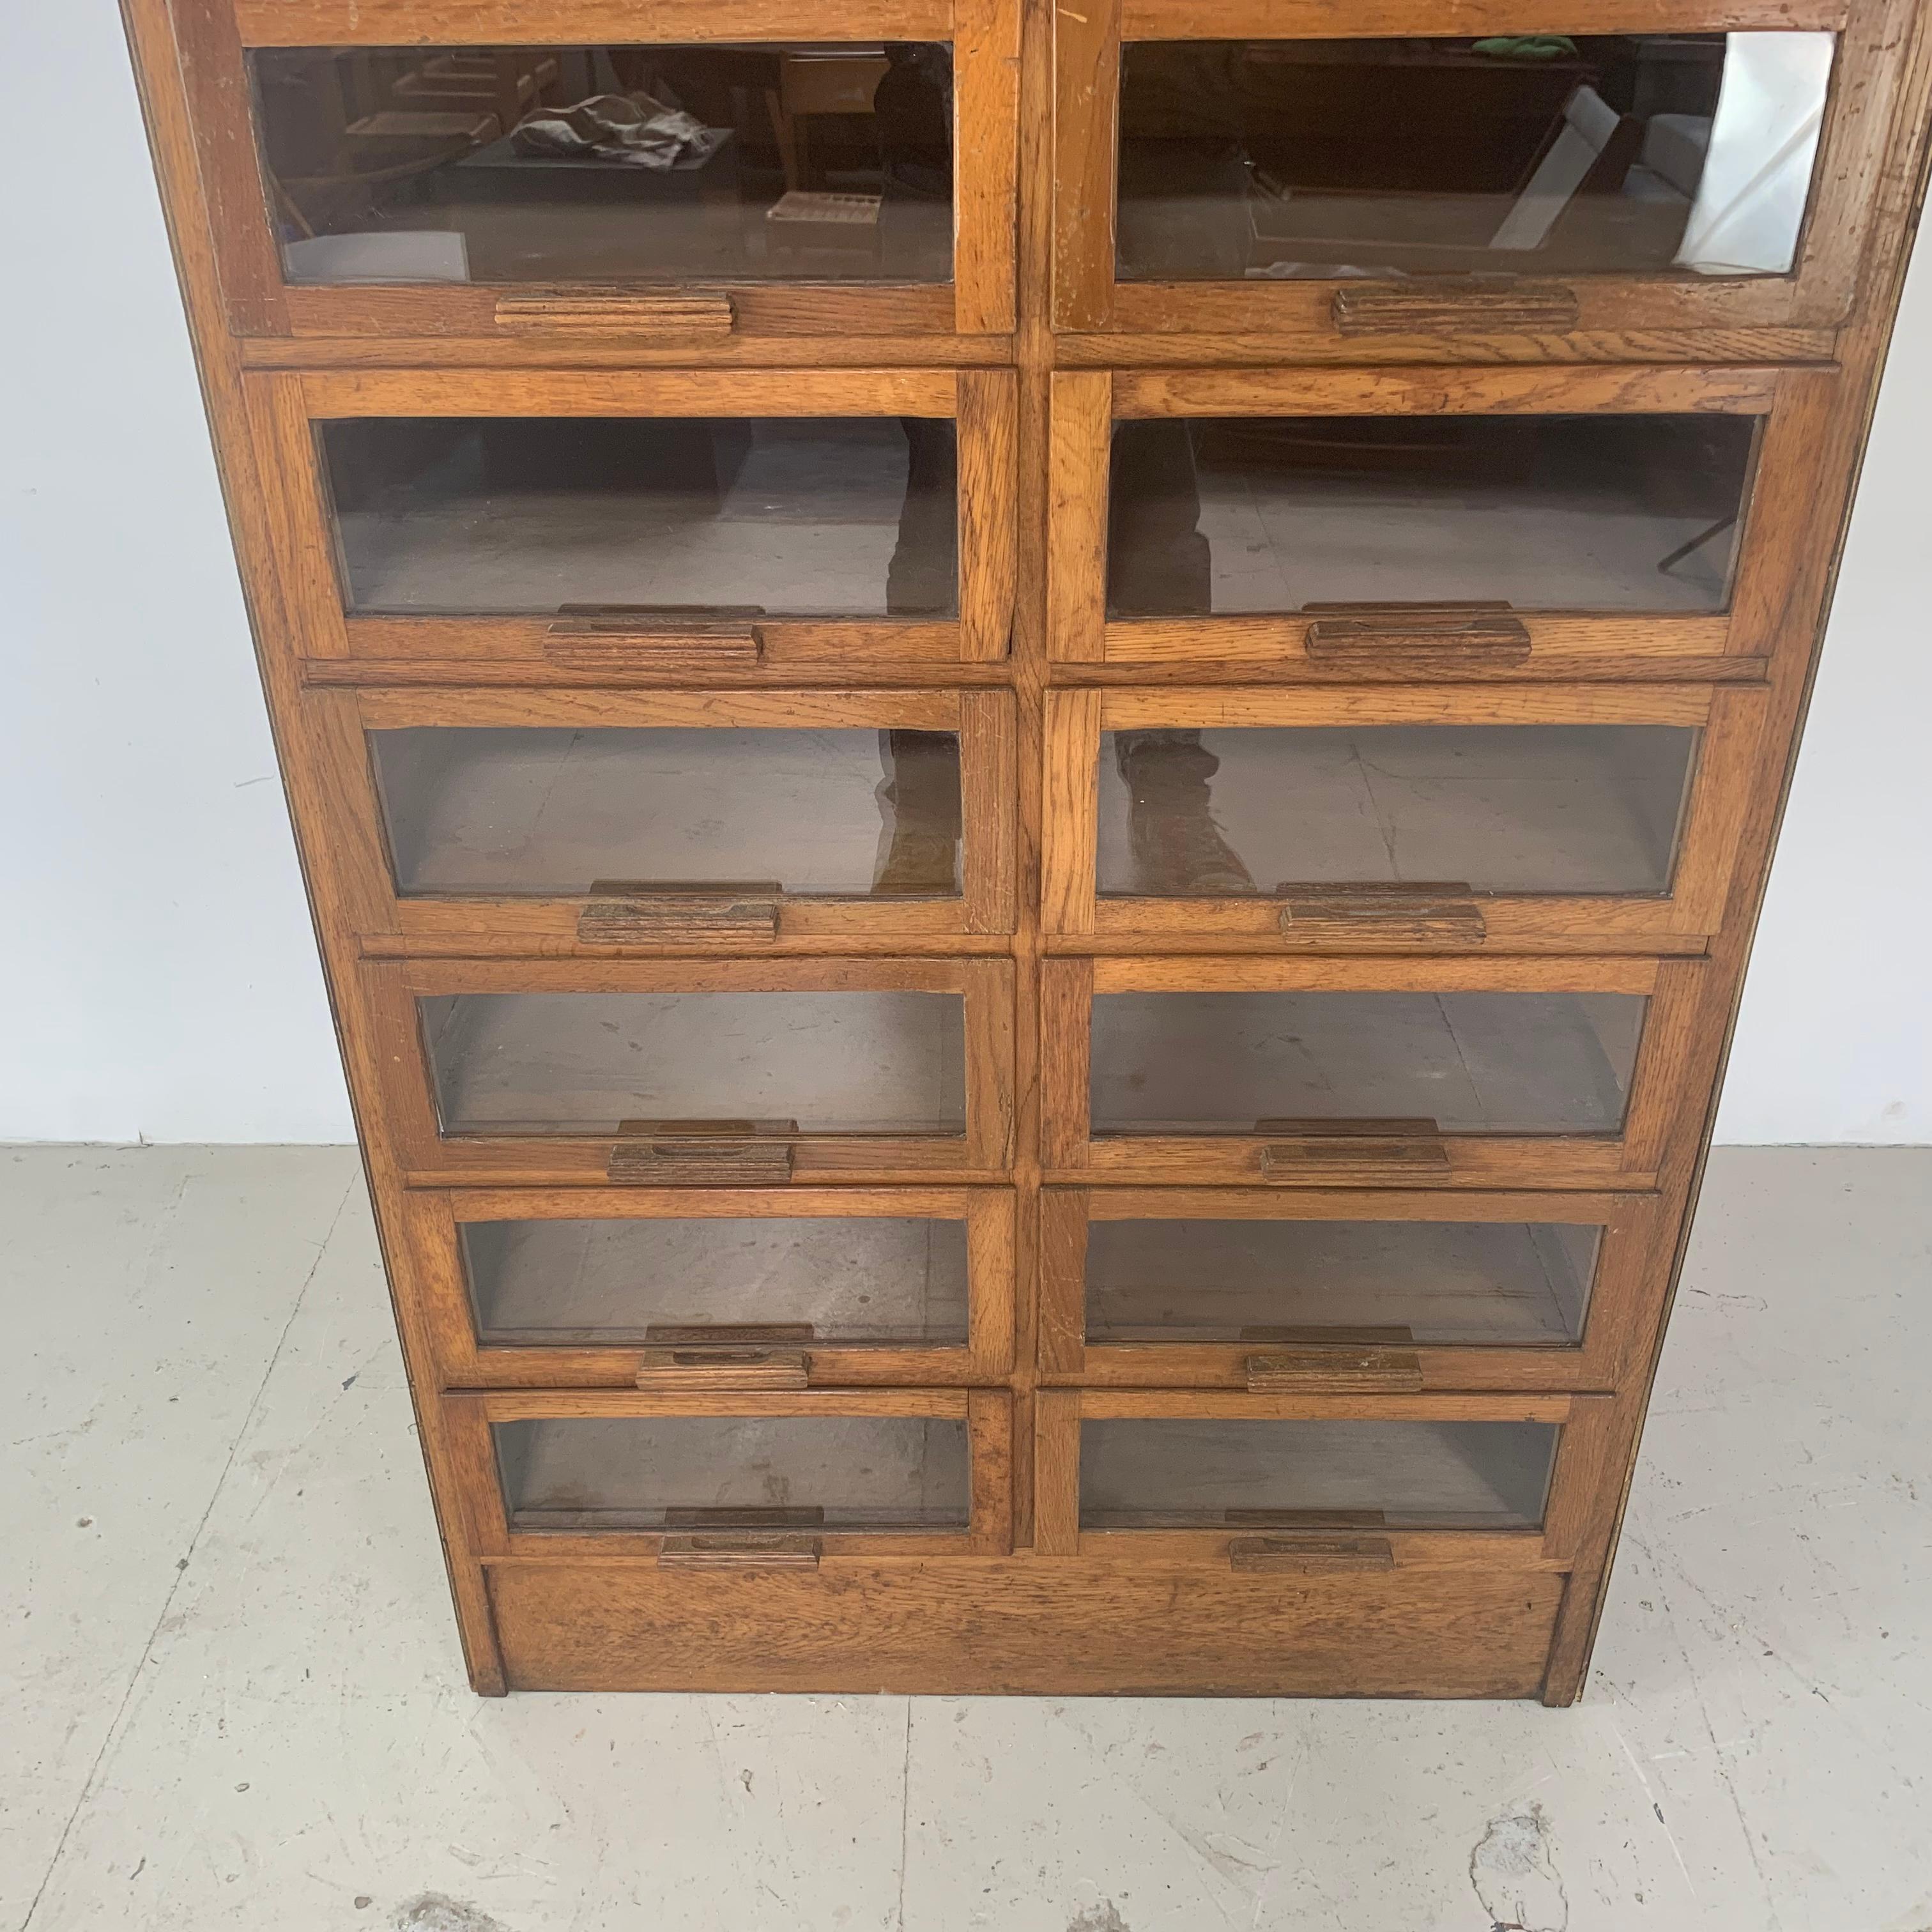 Vintage 20-Drawer Haberdashery Cabinet Shop Display Made by Dudley & Co. 1